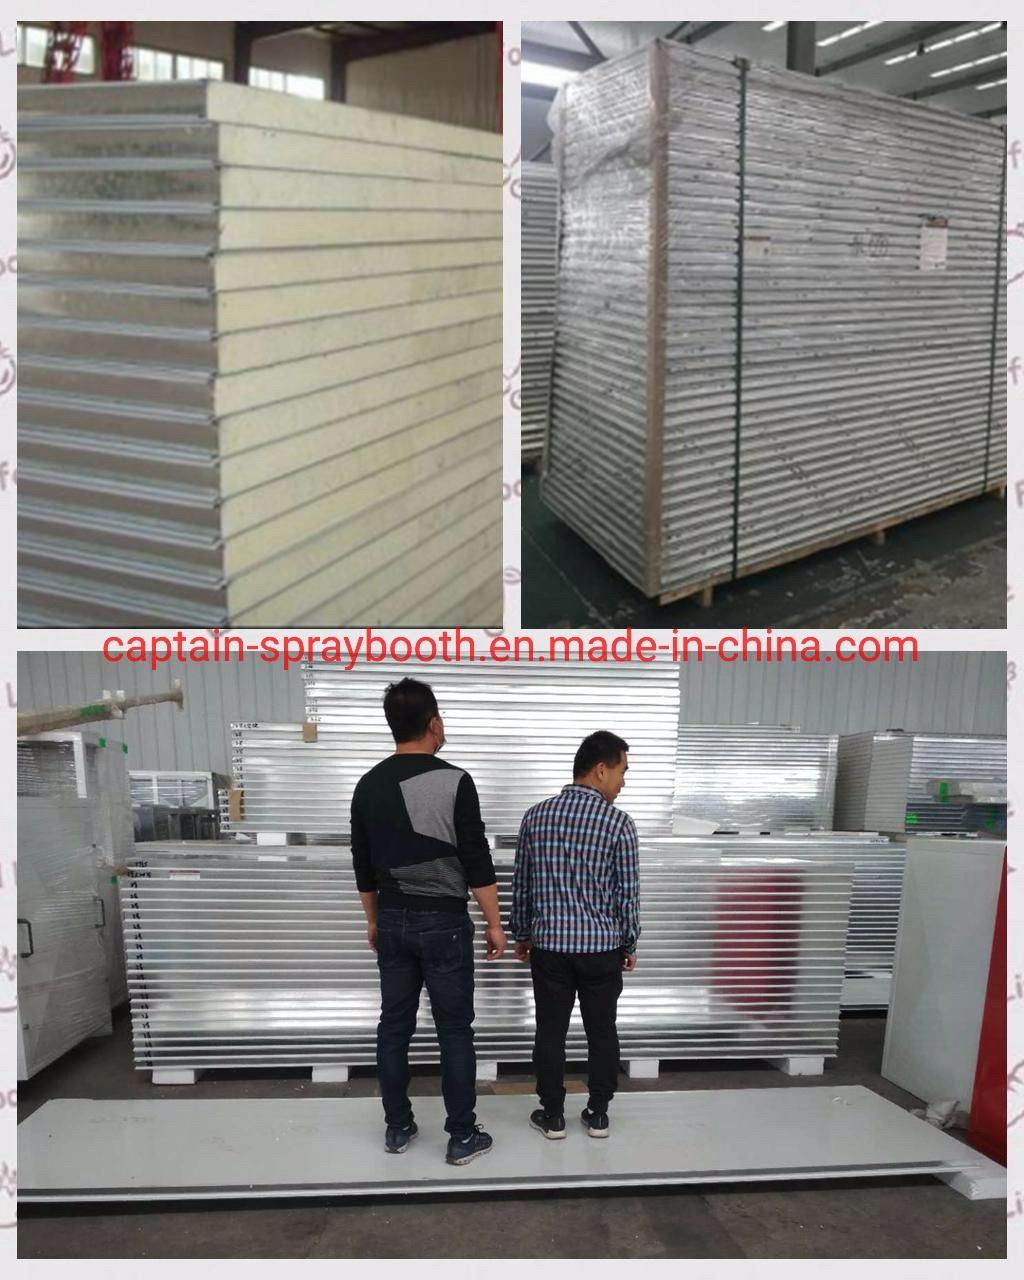 Spray Booth for Different Cars at Factory Price